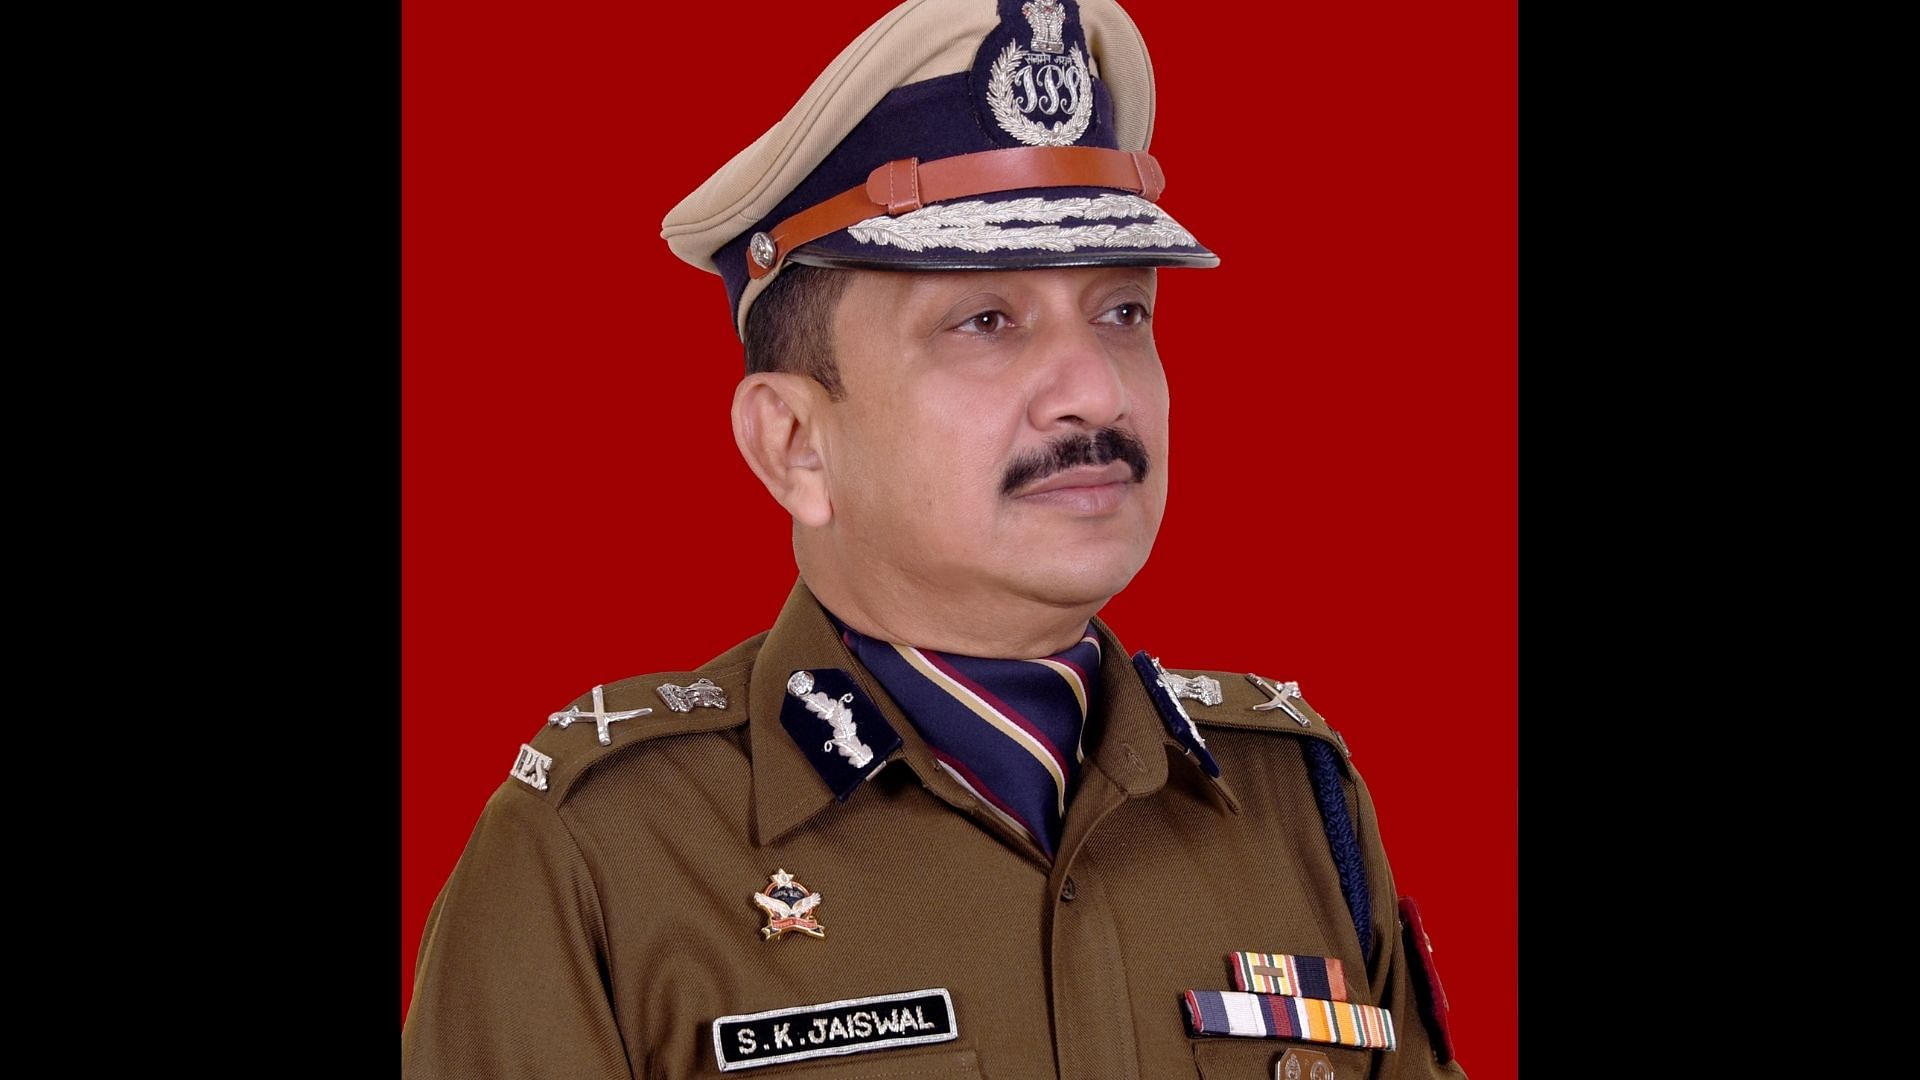 Subodh Kumar Jaiswal had been serving as the Director General of the Central Industrial Security Force.